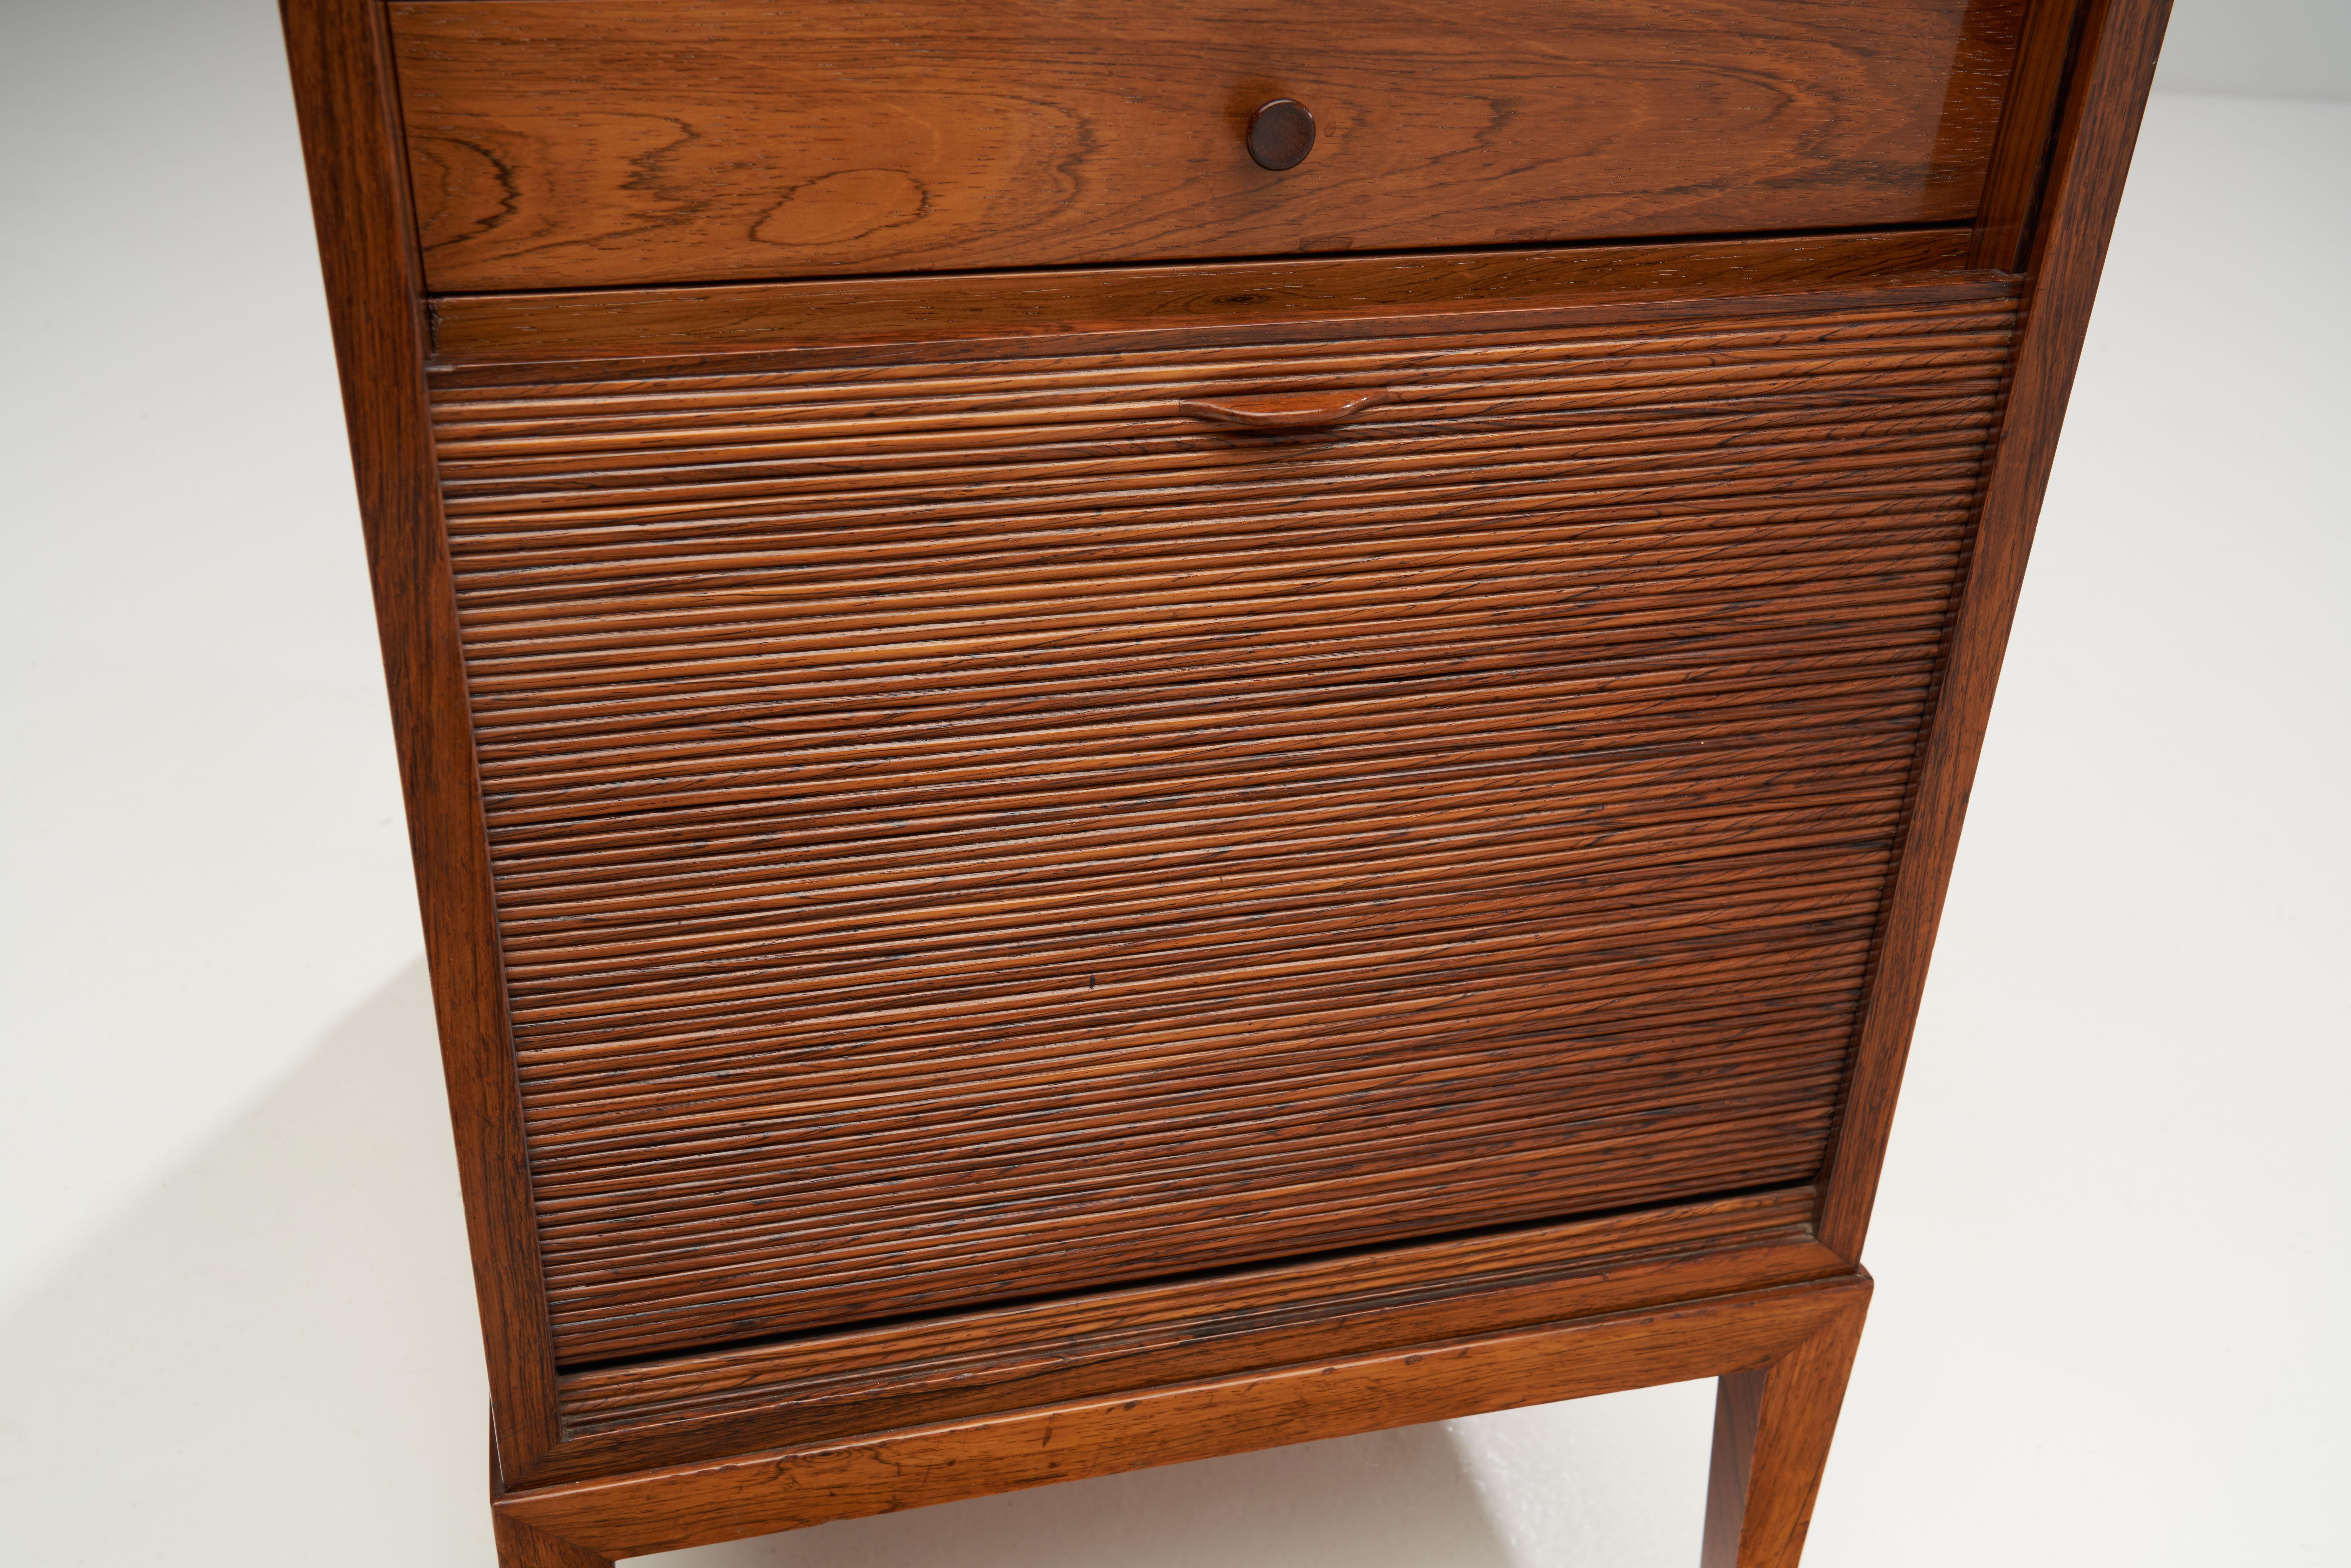 Frits Henningsen Solid Wood Cabinet with Tambour Door, Denmark, 1950s For Sale 6